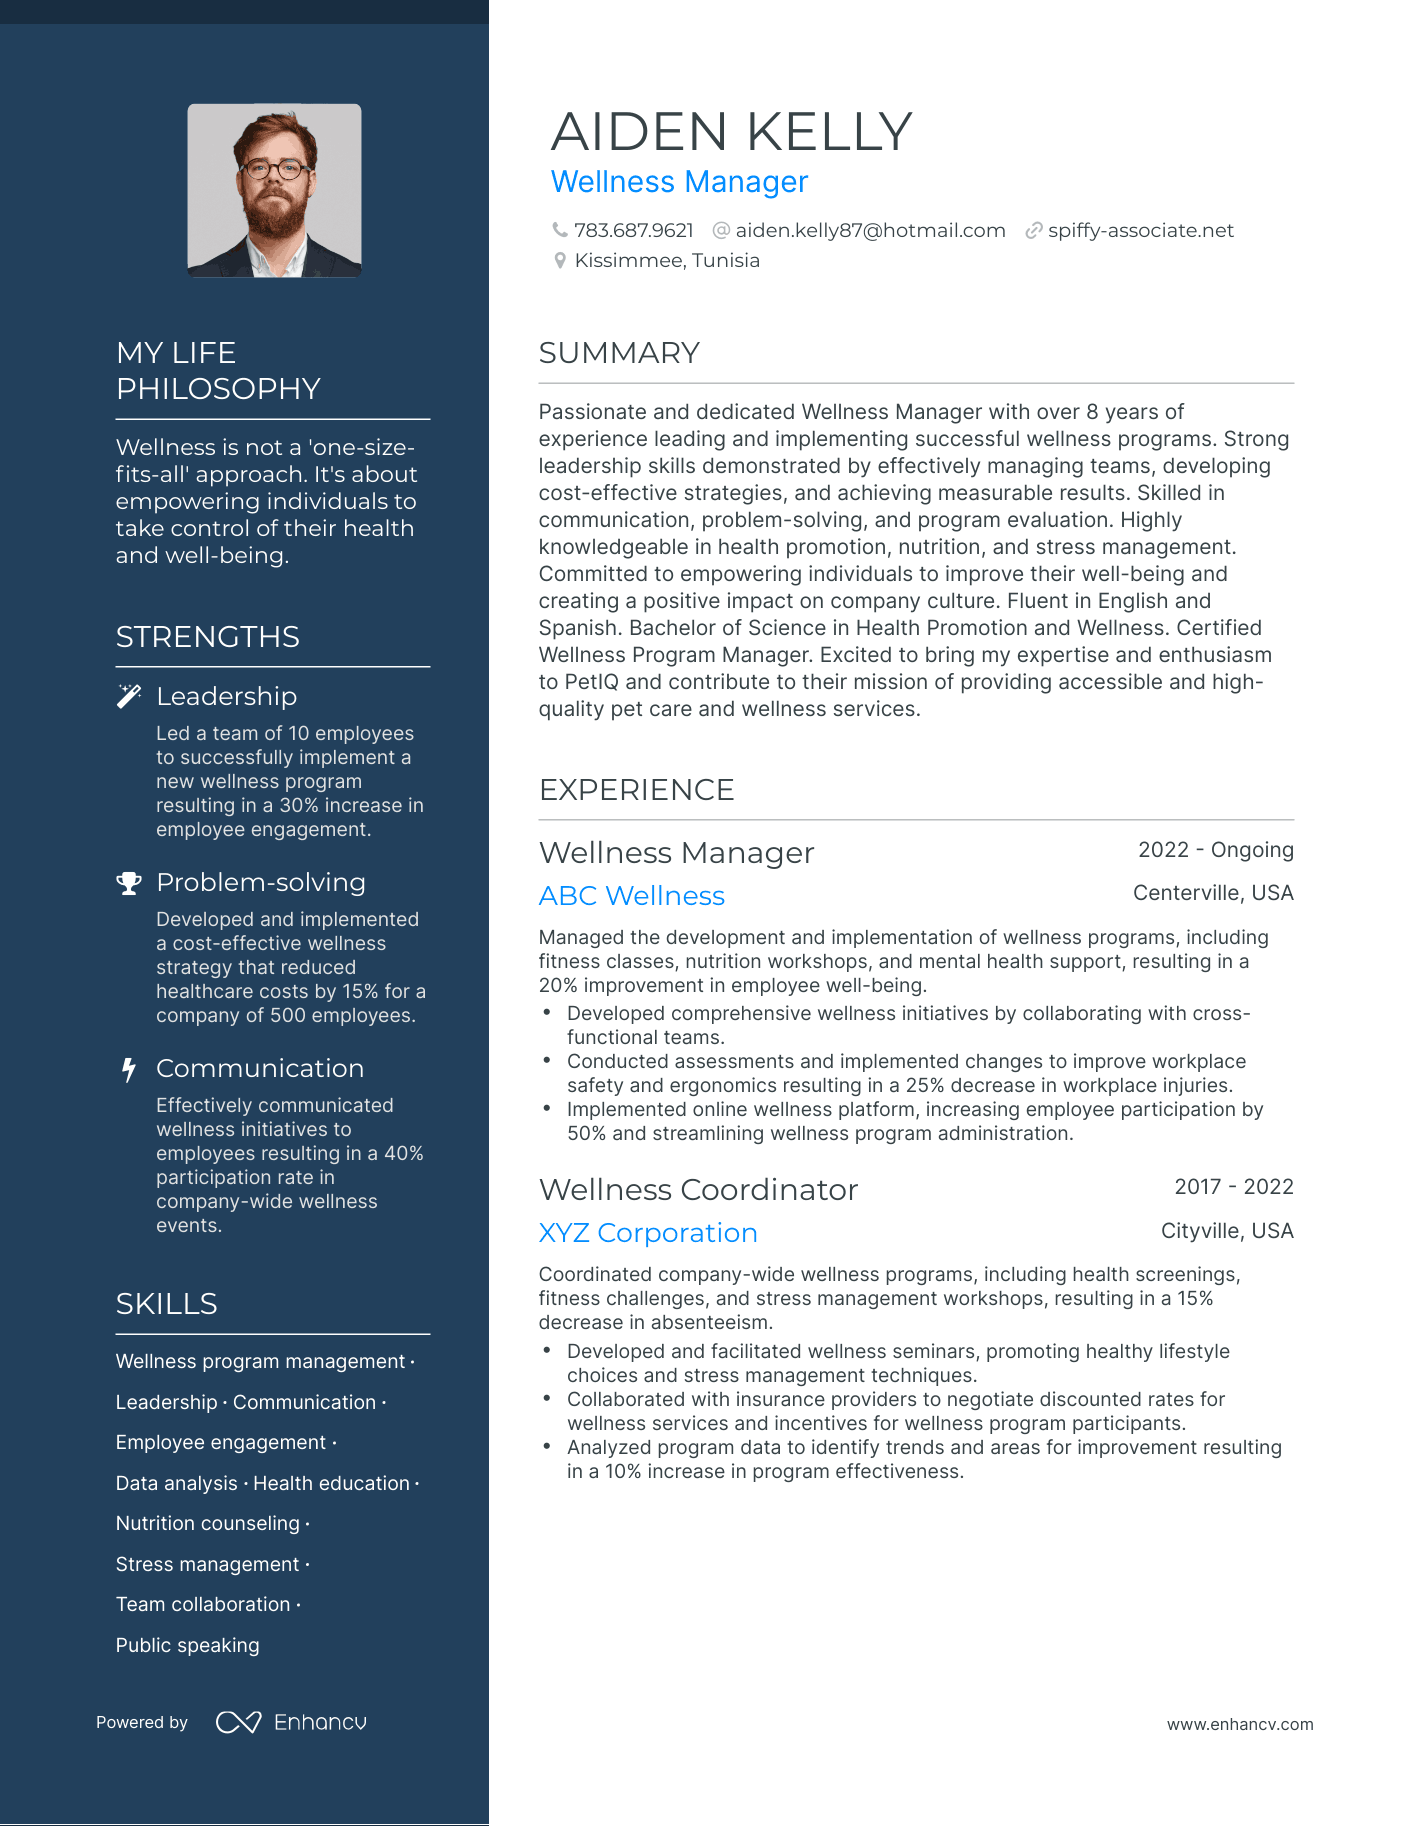 Wellness Manager resume example